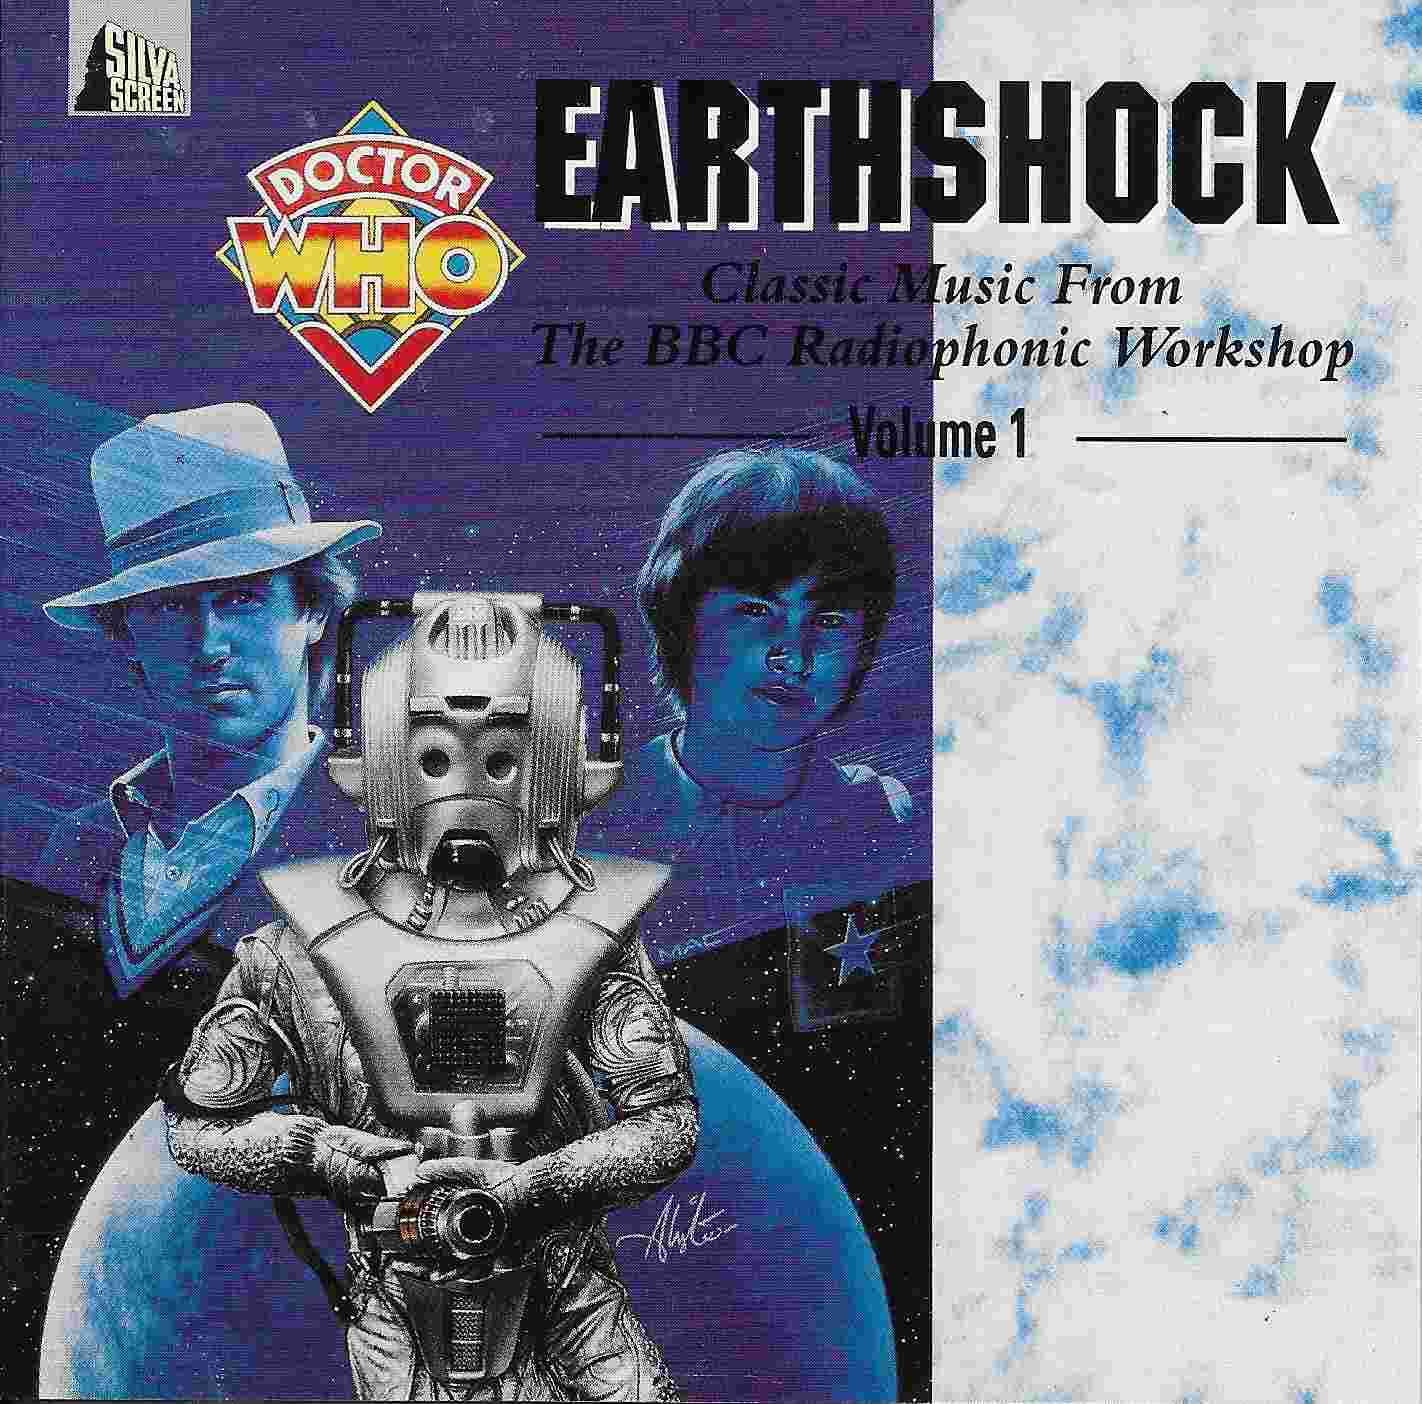 Picture of FILMCD 709 Earthshock - Doctor who the music - Volume 1 by artist Various from the BBC cds - Records and Tapes library